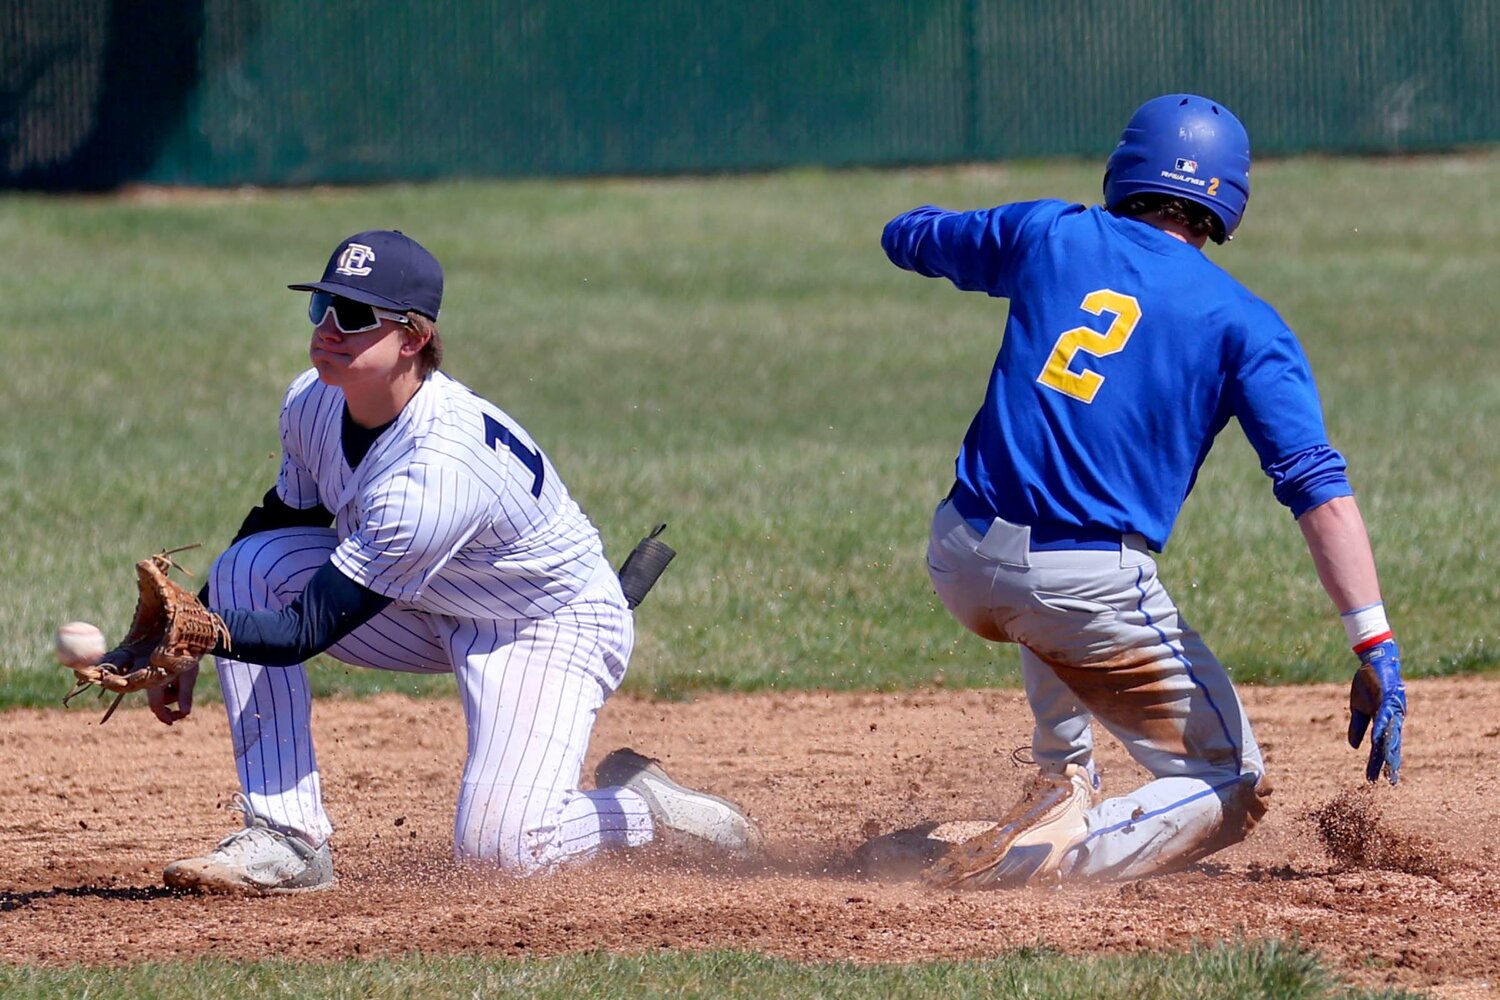 Wyatt Motz of Crawfordsville - sliding into second base ahead of the throw to Ayden Batchelor of Fountain Central